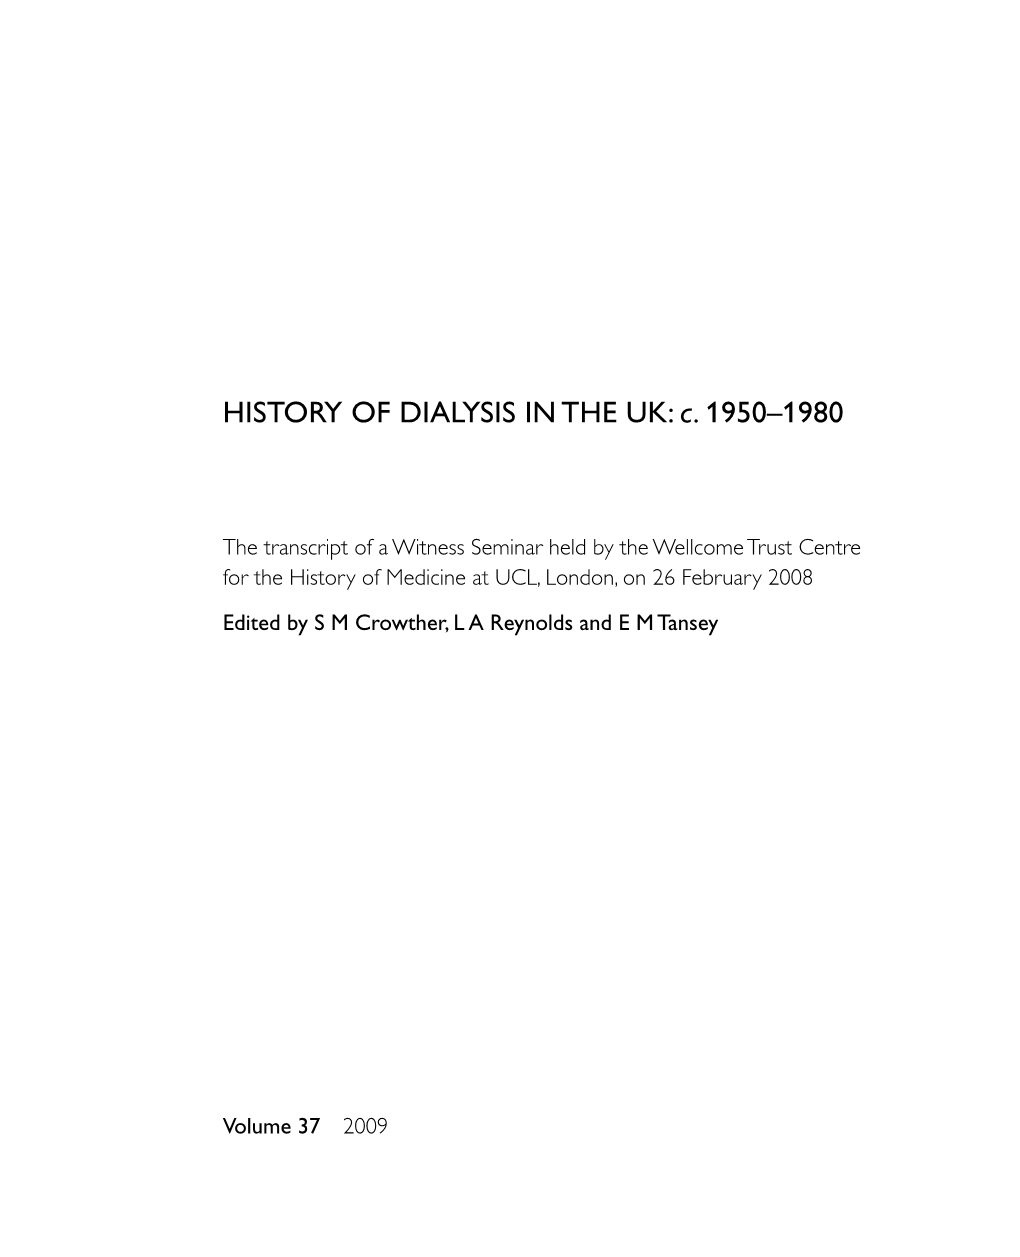 History of Dialysis in the UK: C